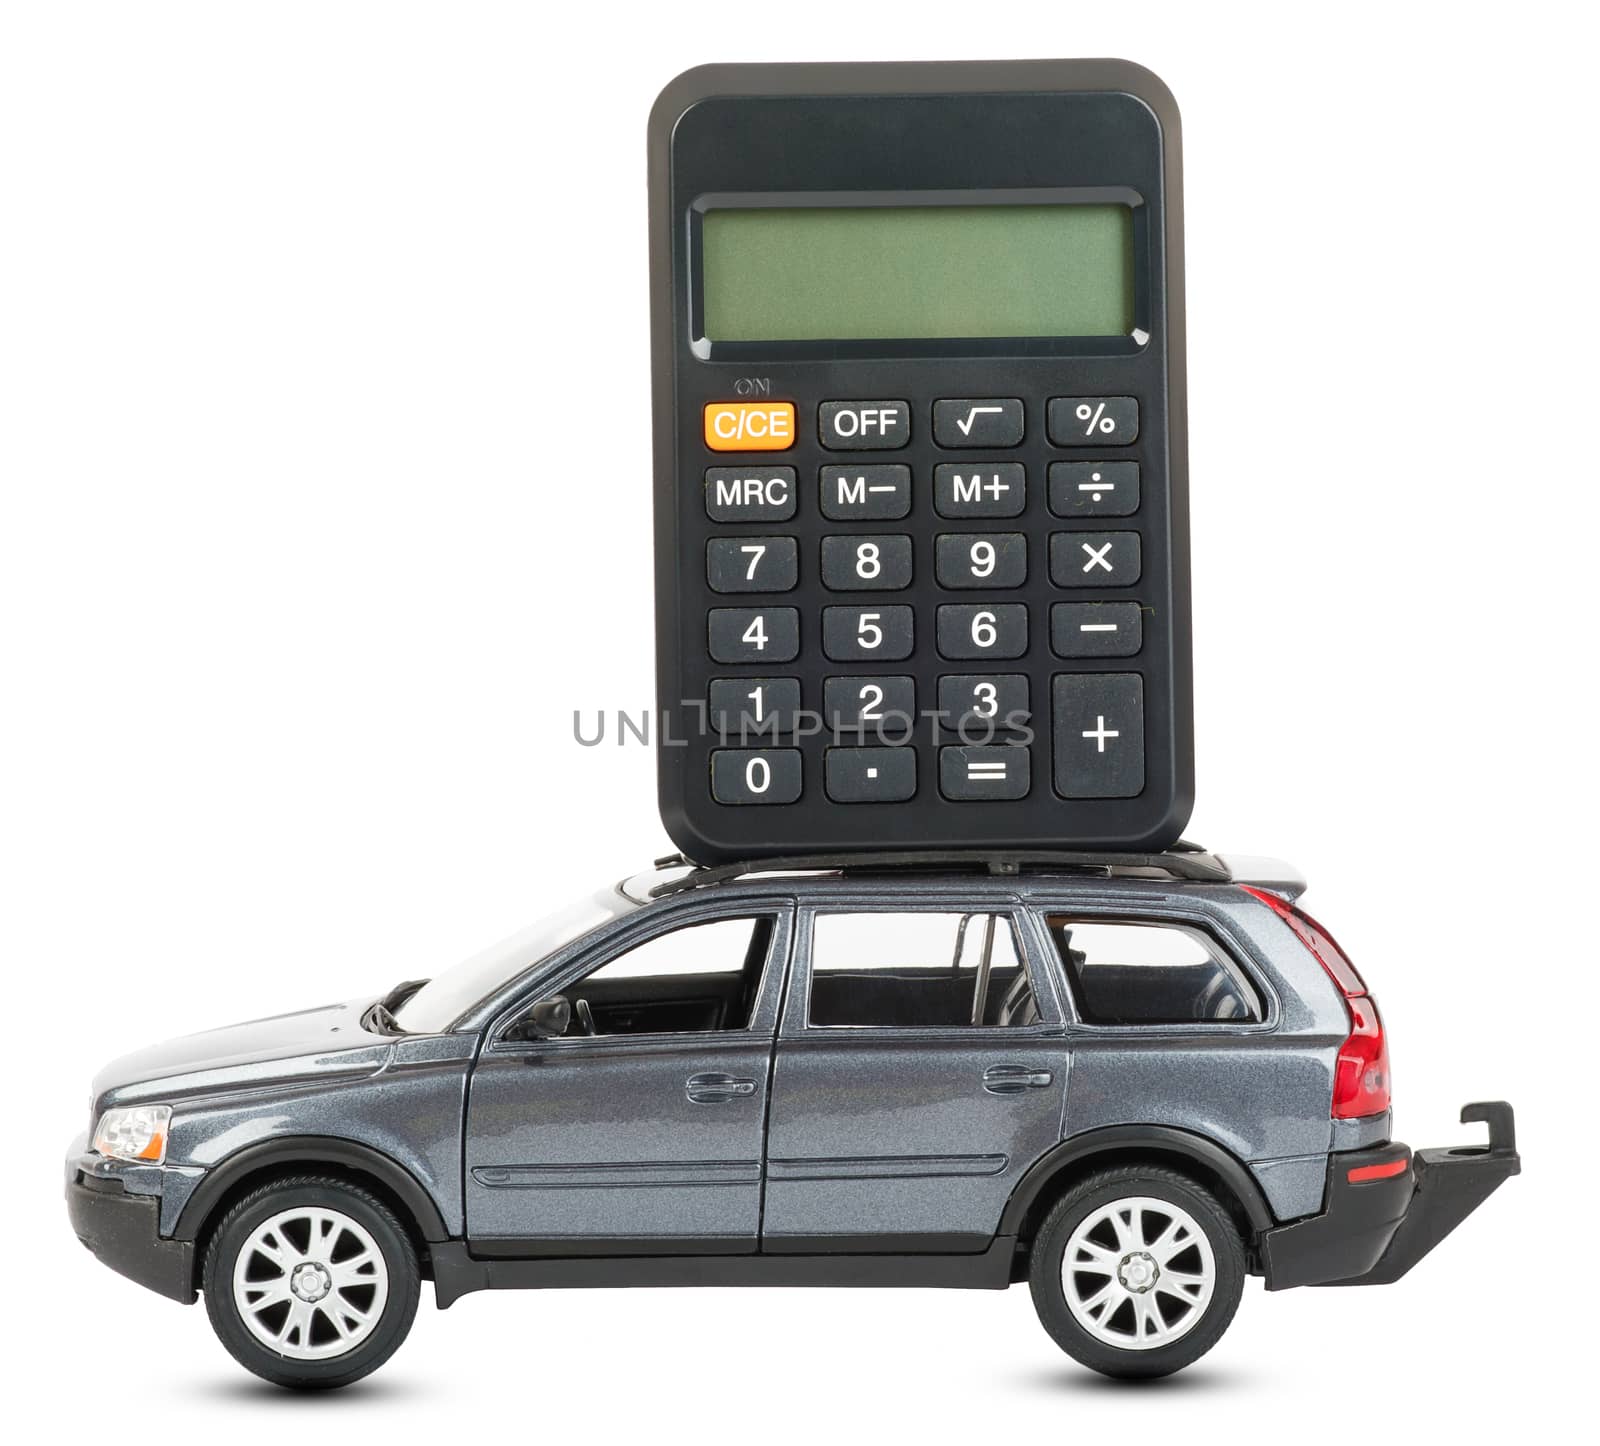 Calculator on car isolated on white background, side viewCar isolated on white background, side view